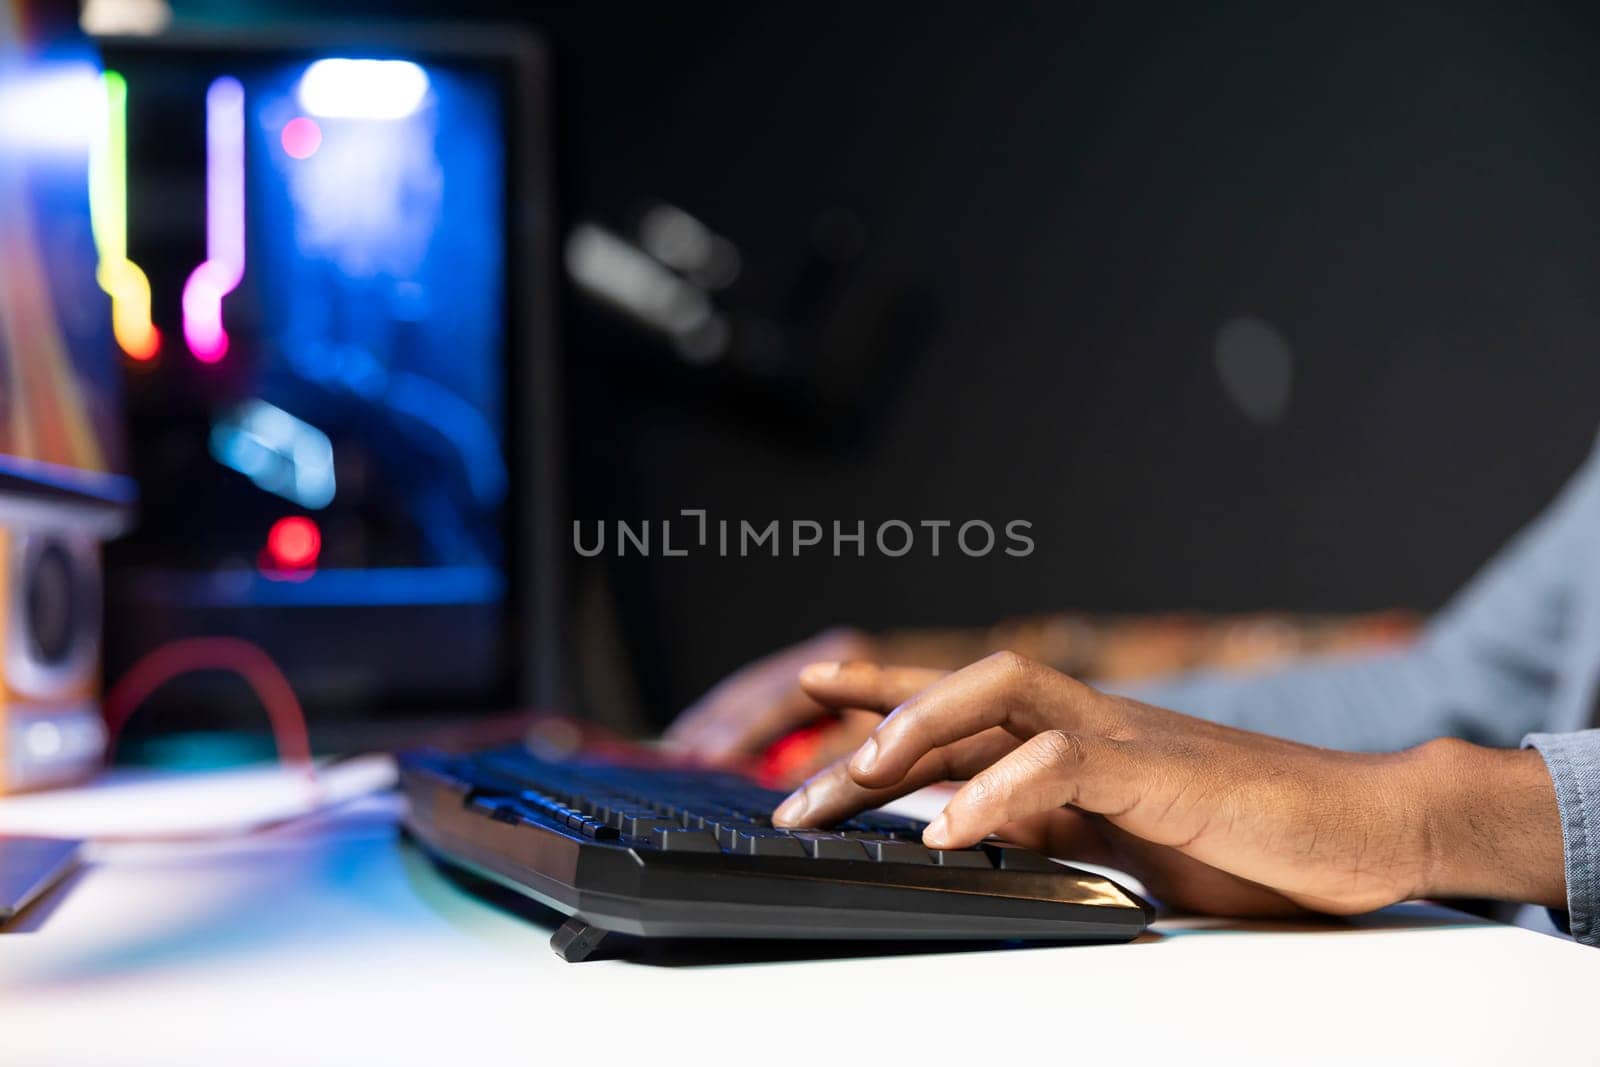 Keyboard used by gamer competing in online multiplayer videogame at home, close up shot. Focus on computer peripheral utilized by man playing on gaming PC in neon illuminated apartment